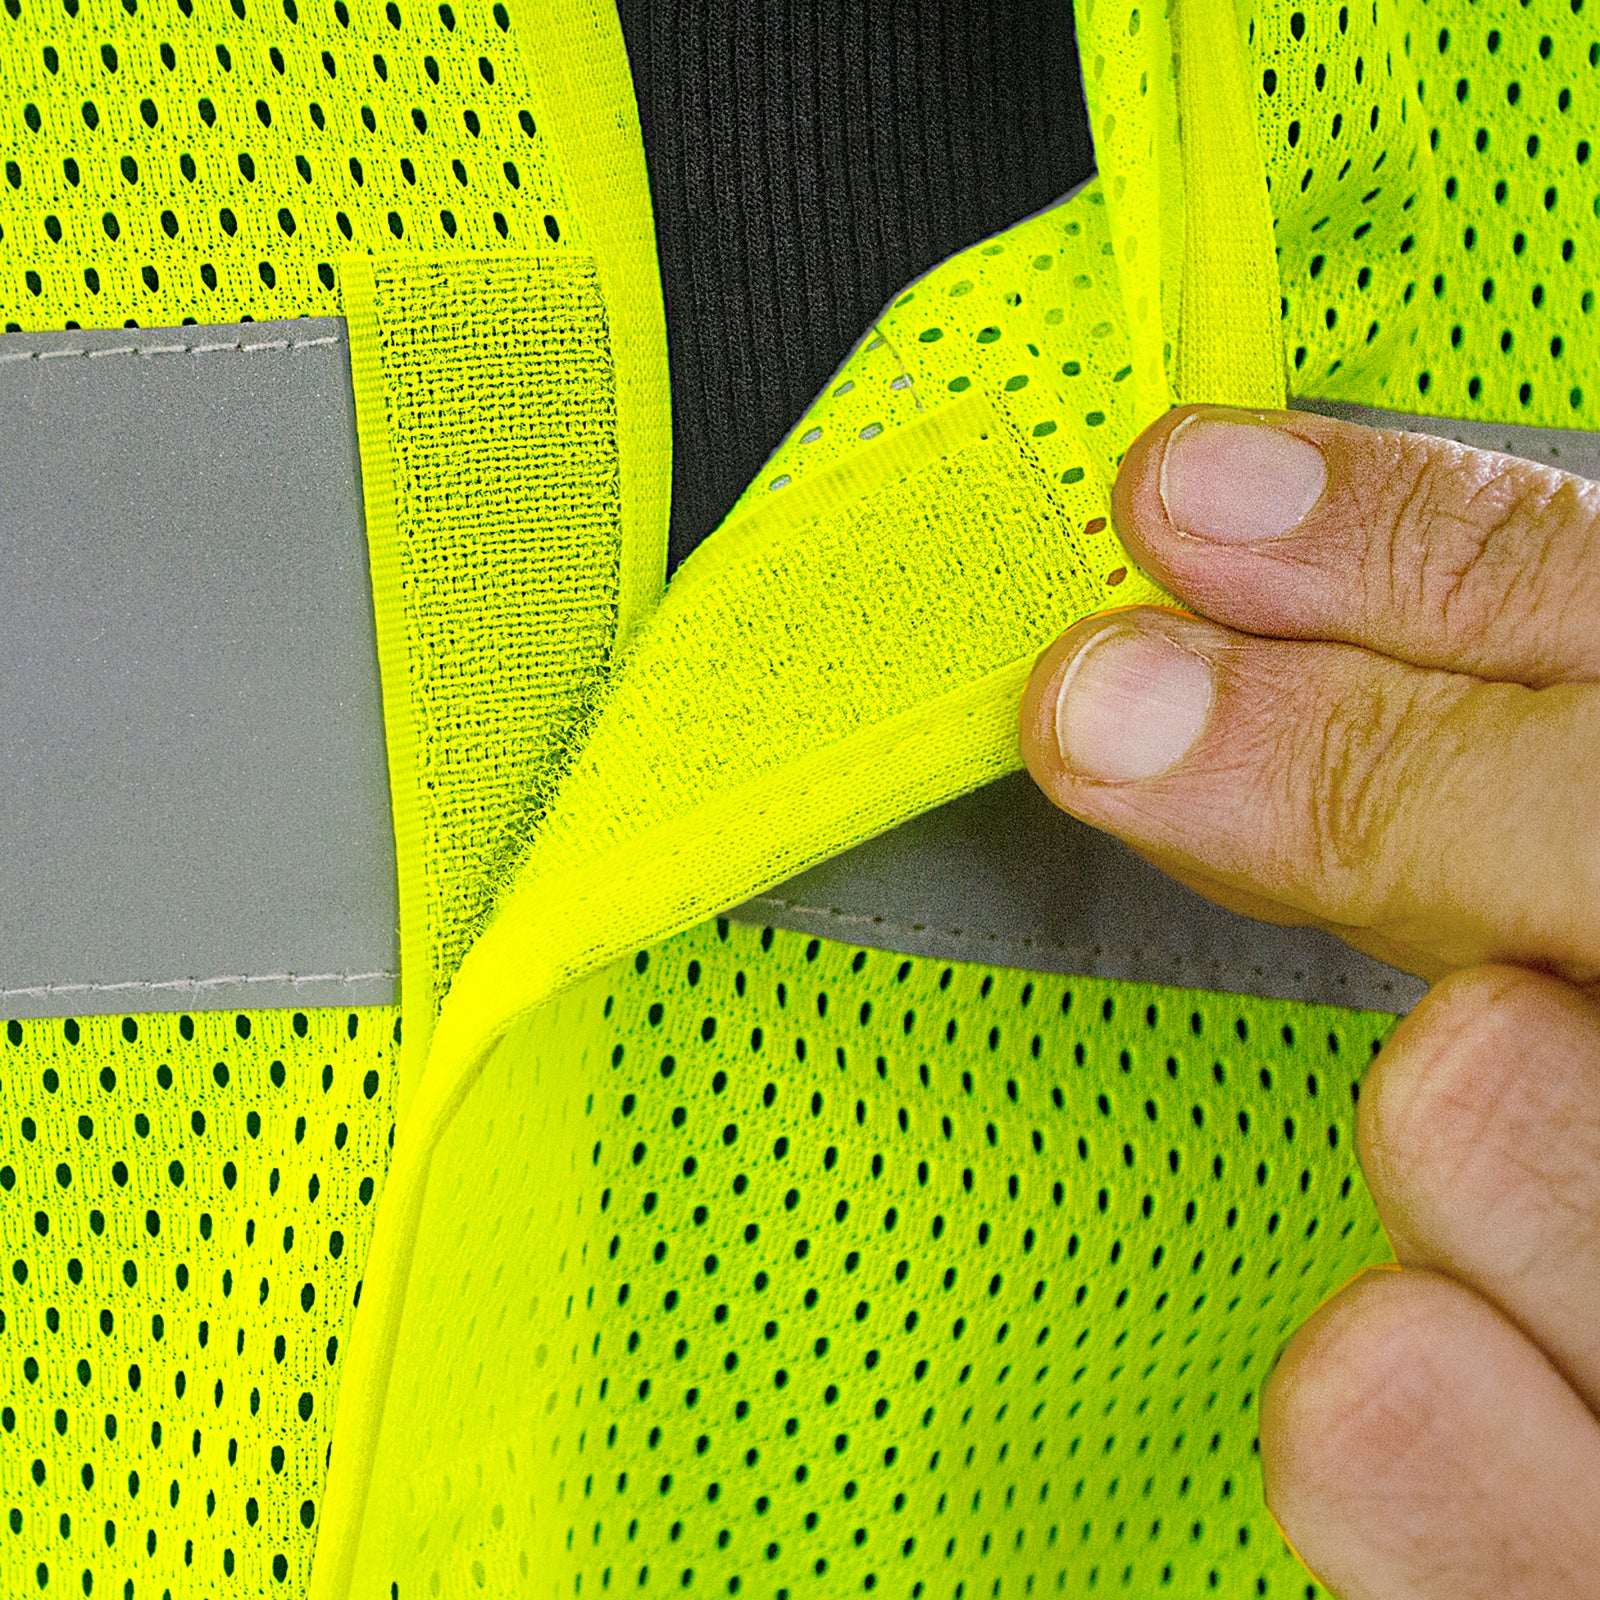 Close-up shows the mesh material and the hook and loop closure of the tearaway reflective safety vest